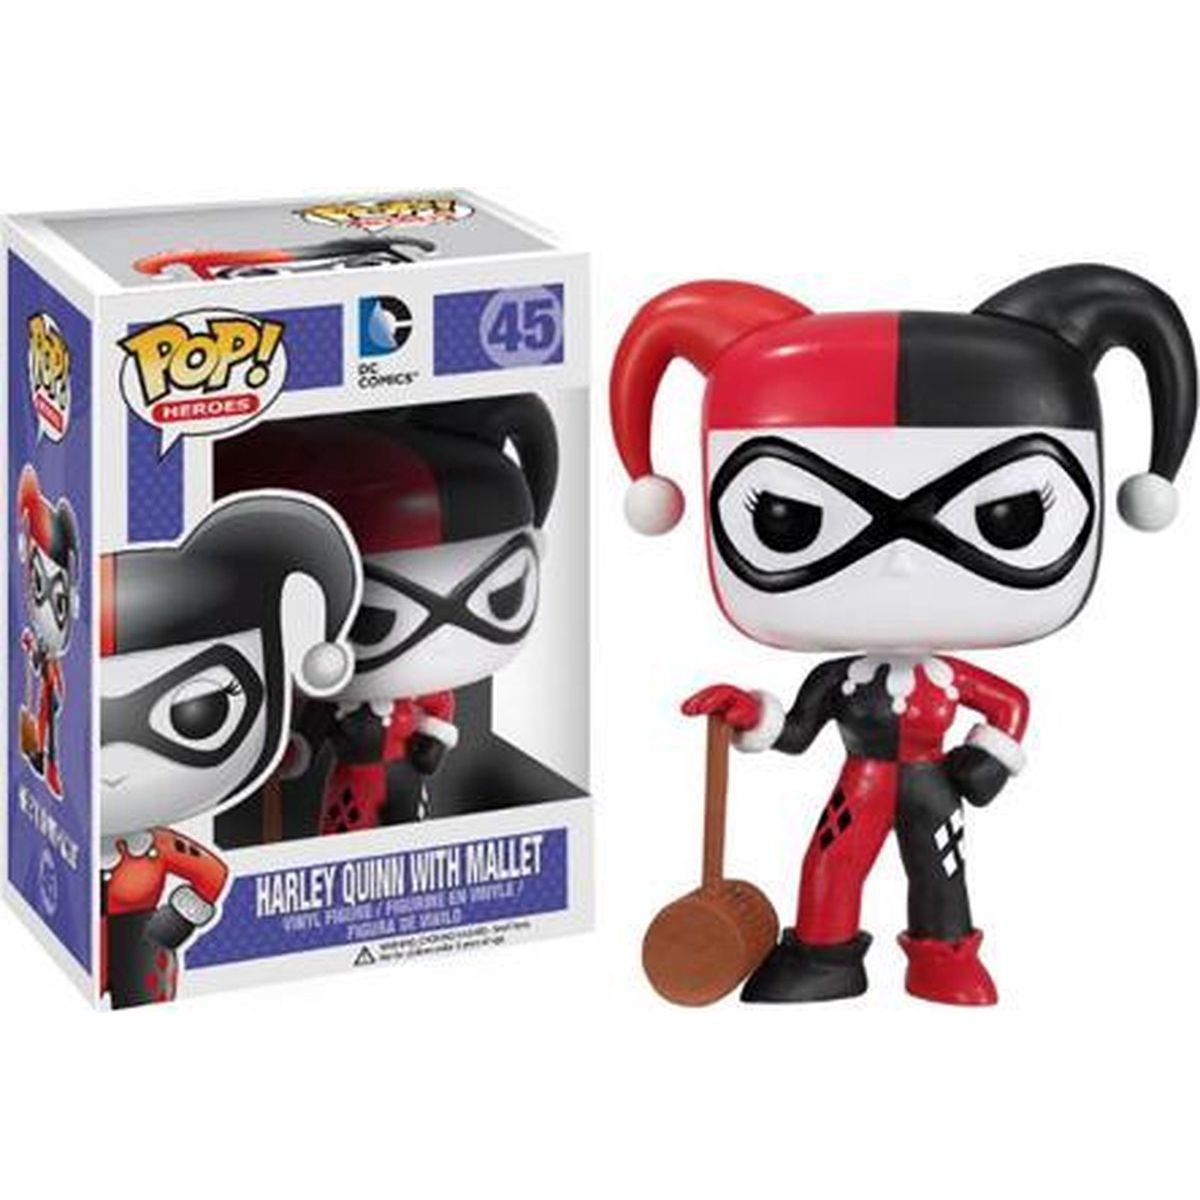 Heroes - Harley Quinn with Mallet - 45